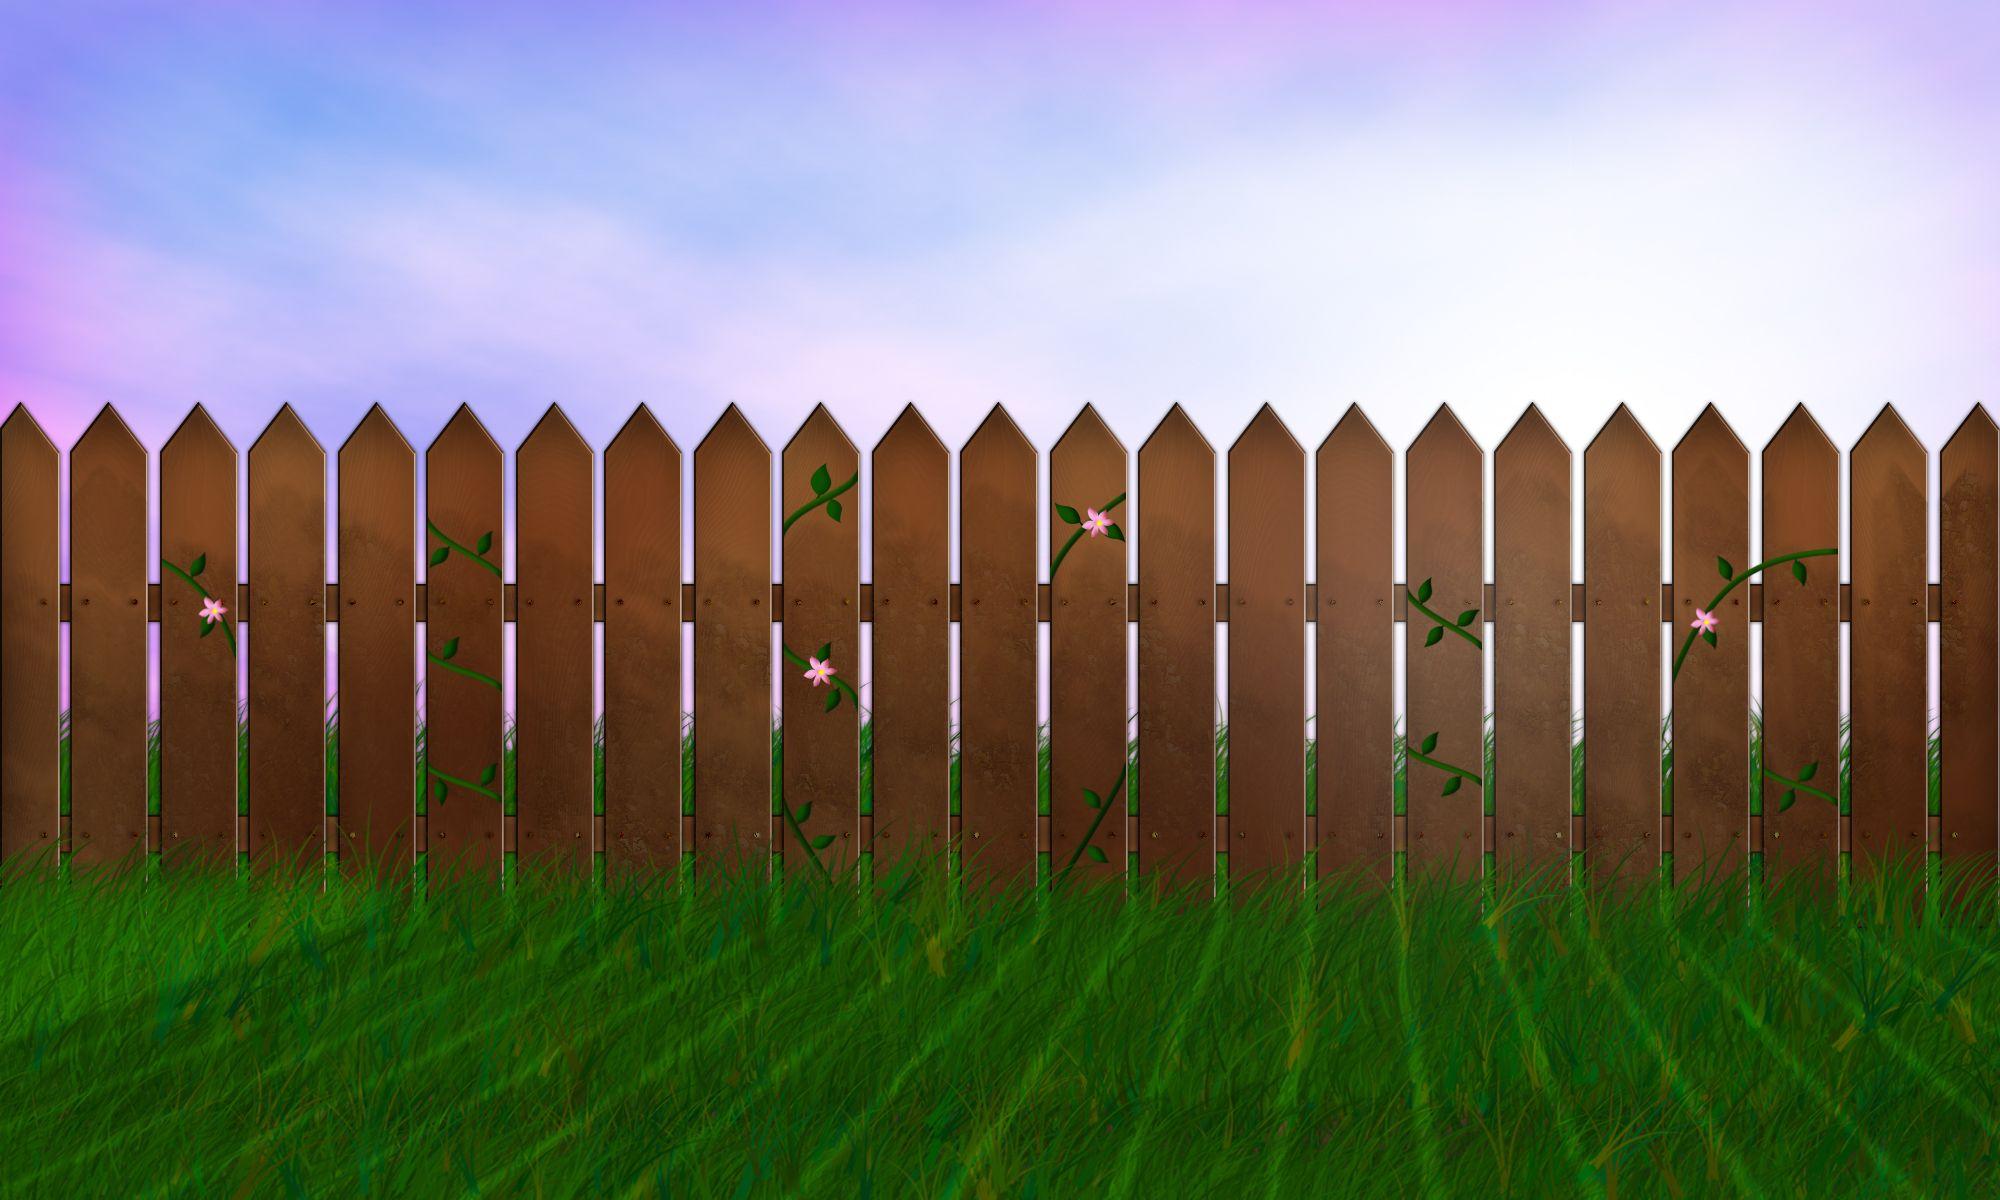 Fence Wallpapers Top Free Fence Backgrounds Wallpaperaccess Images, Photos, Reviews